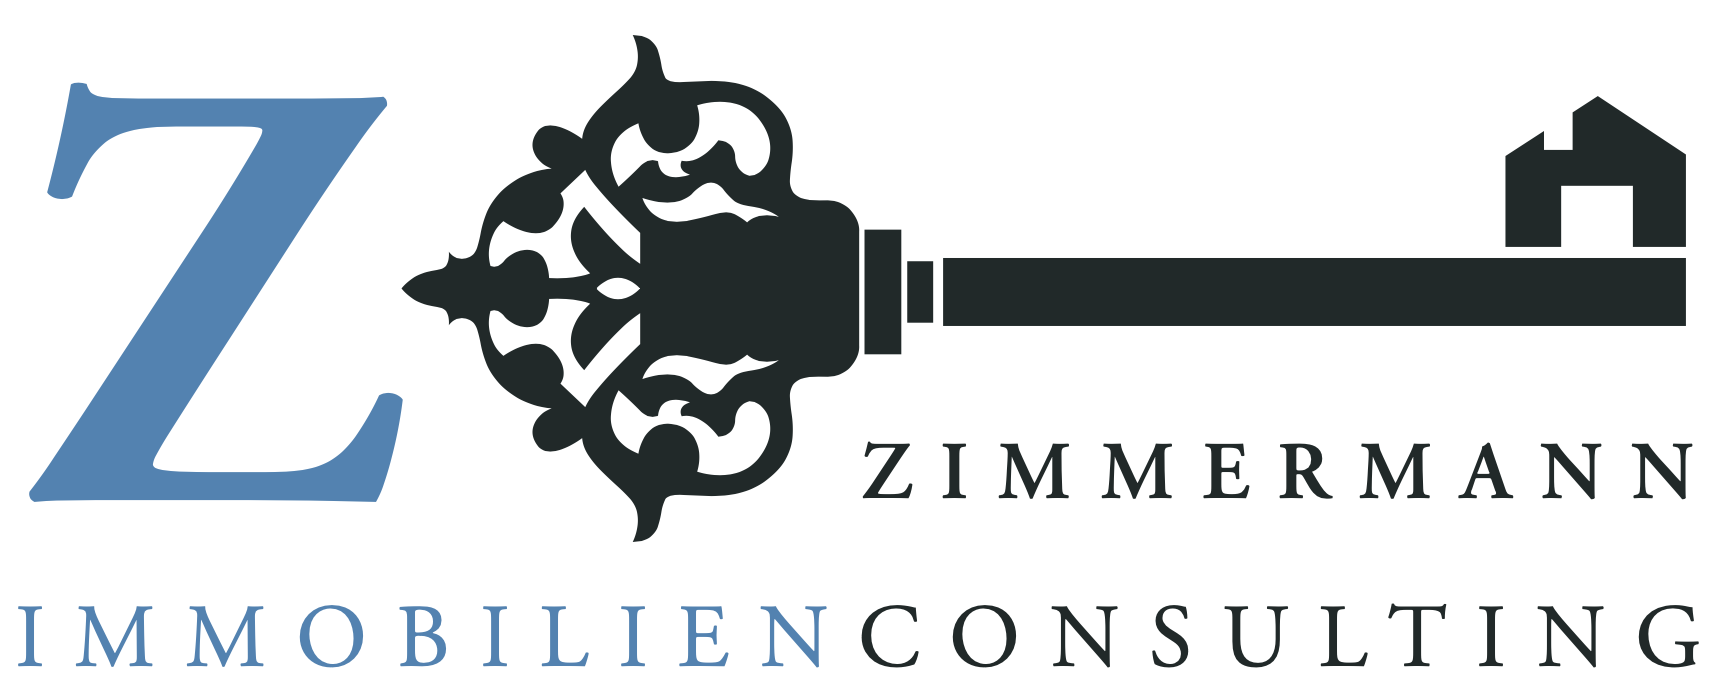 Zimmermann Immobilien Consulting